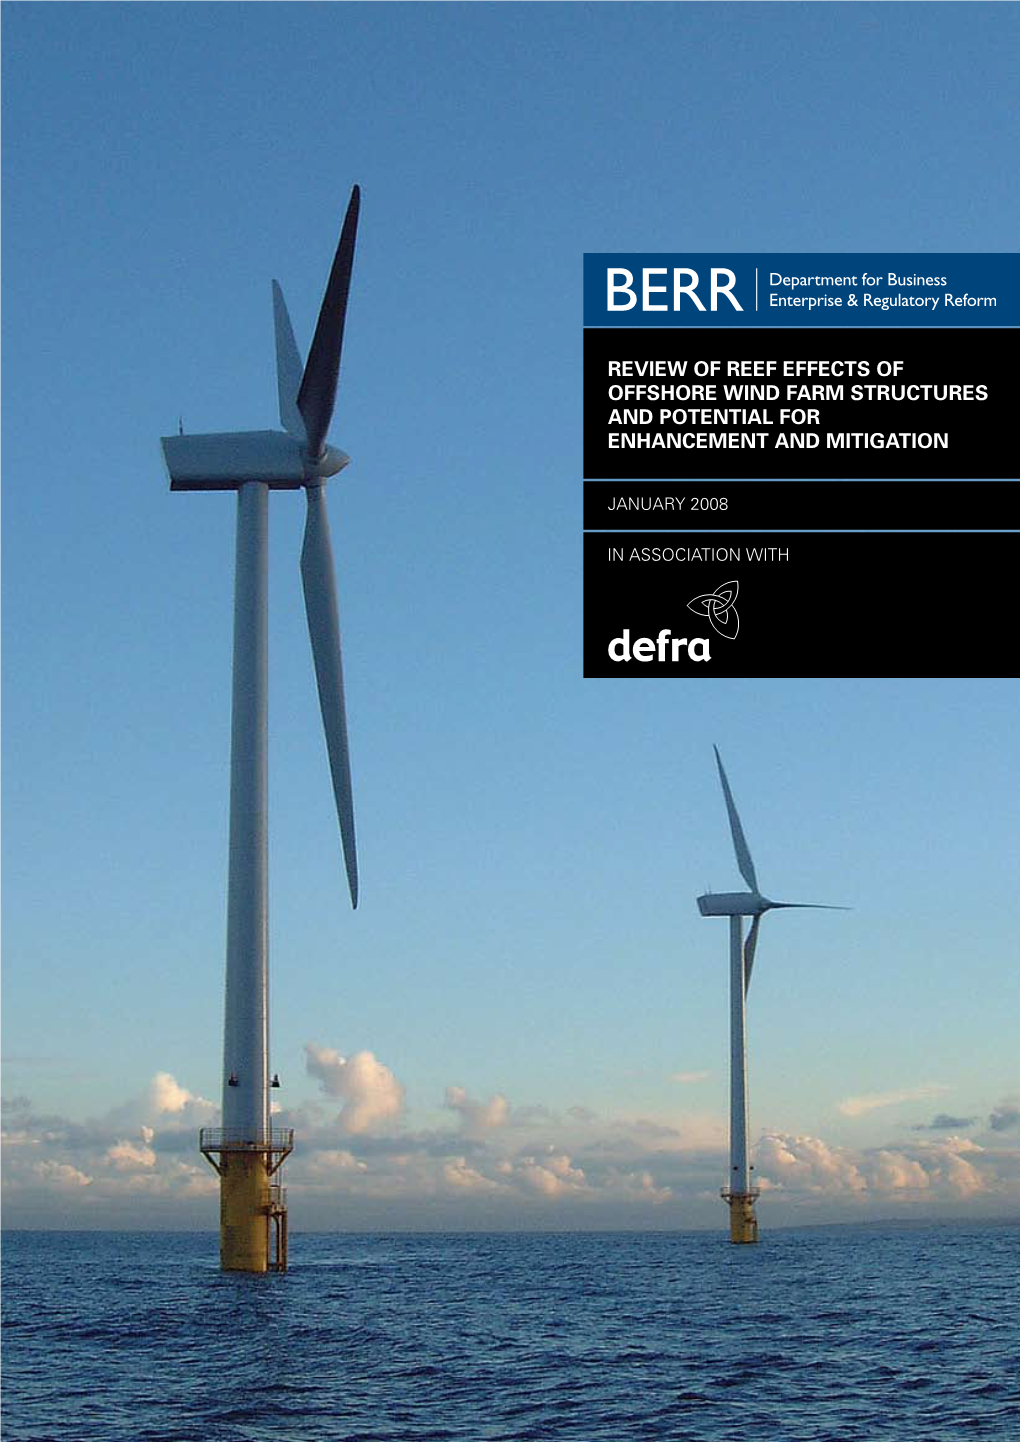 Review of Reef Effects of Offshore Wind Farm Structures and Potential for Enhancement and Mitigation